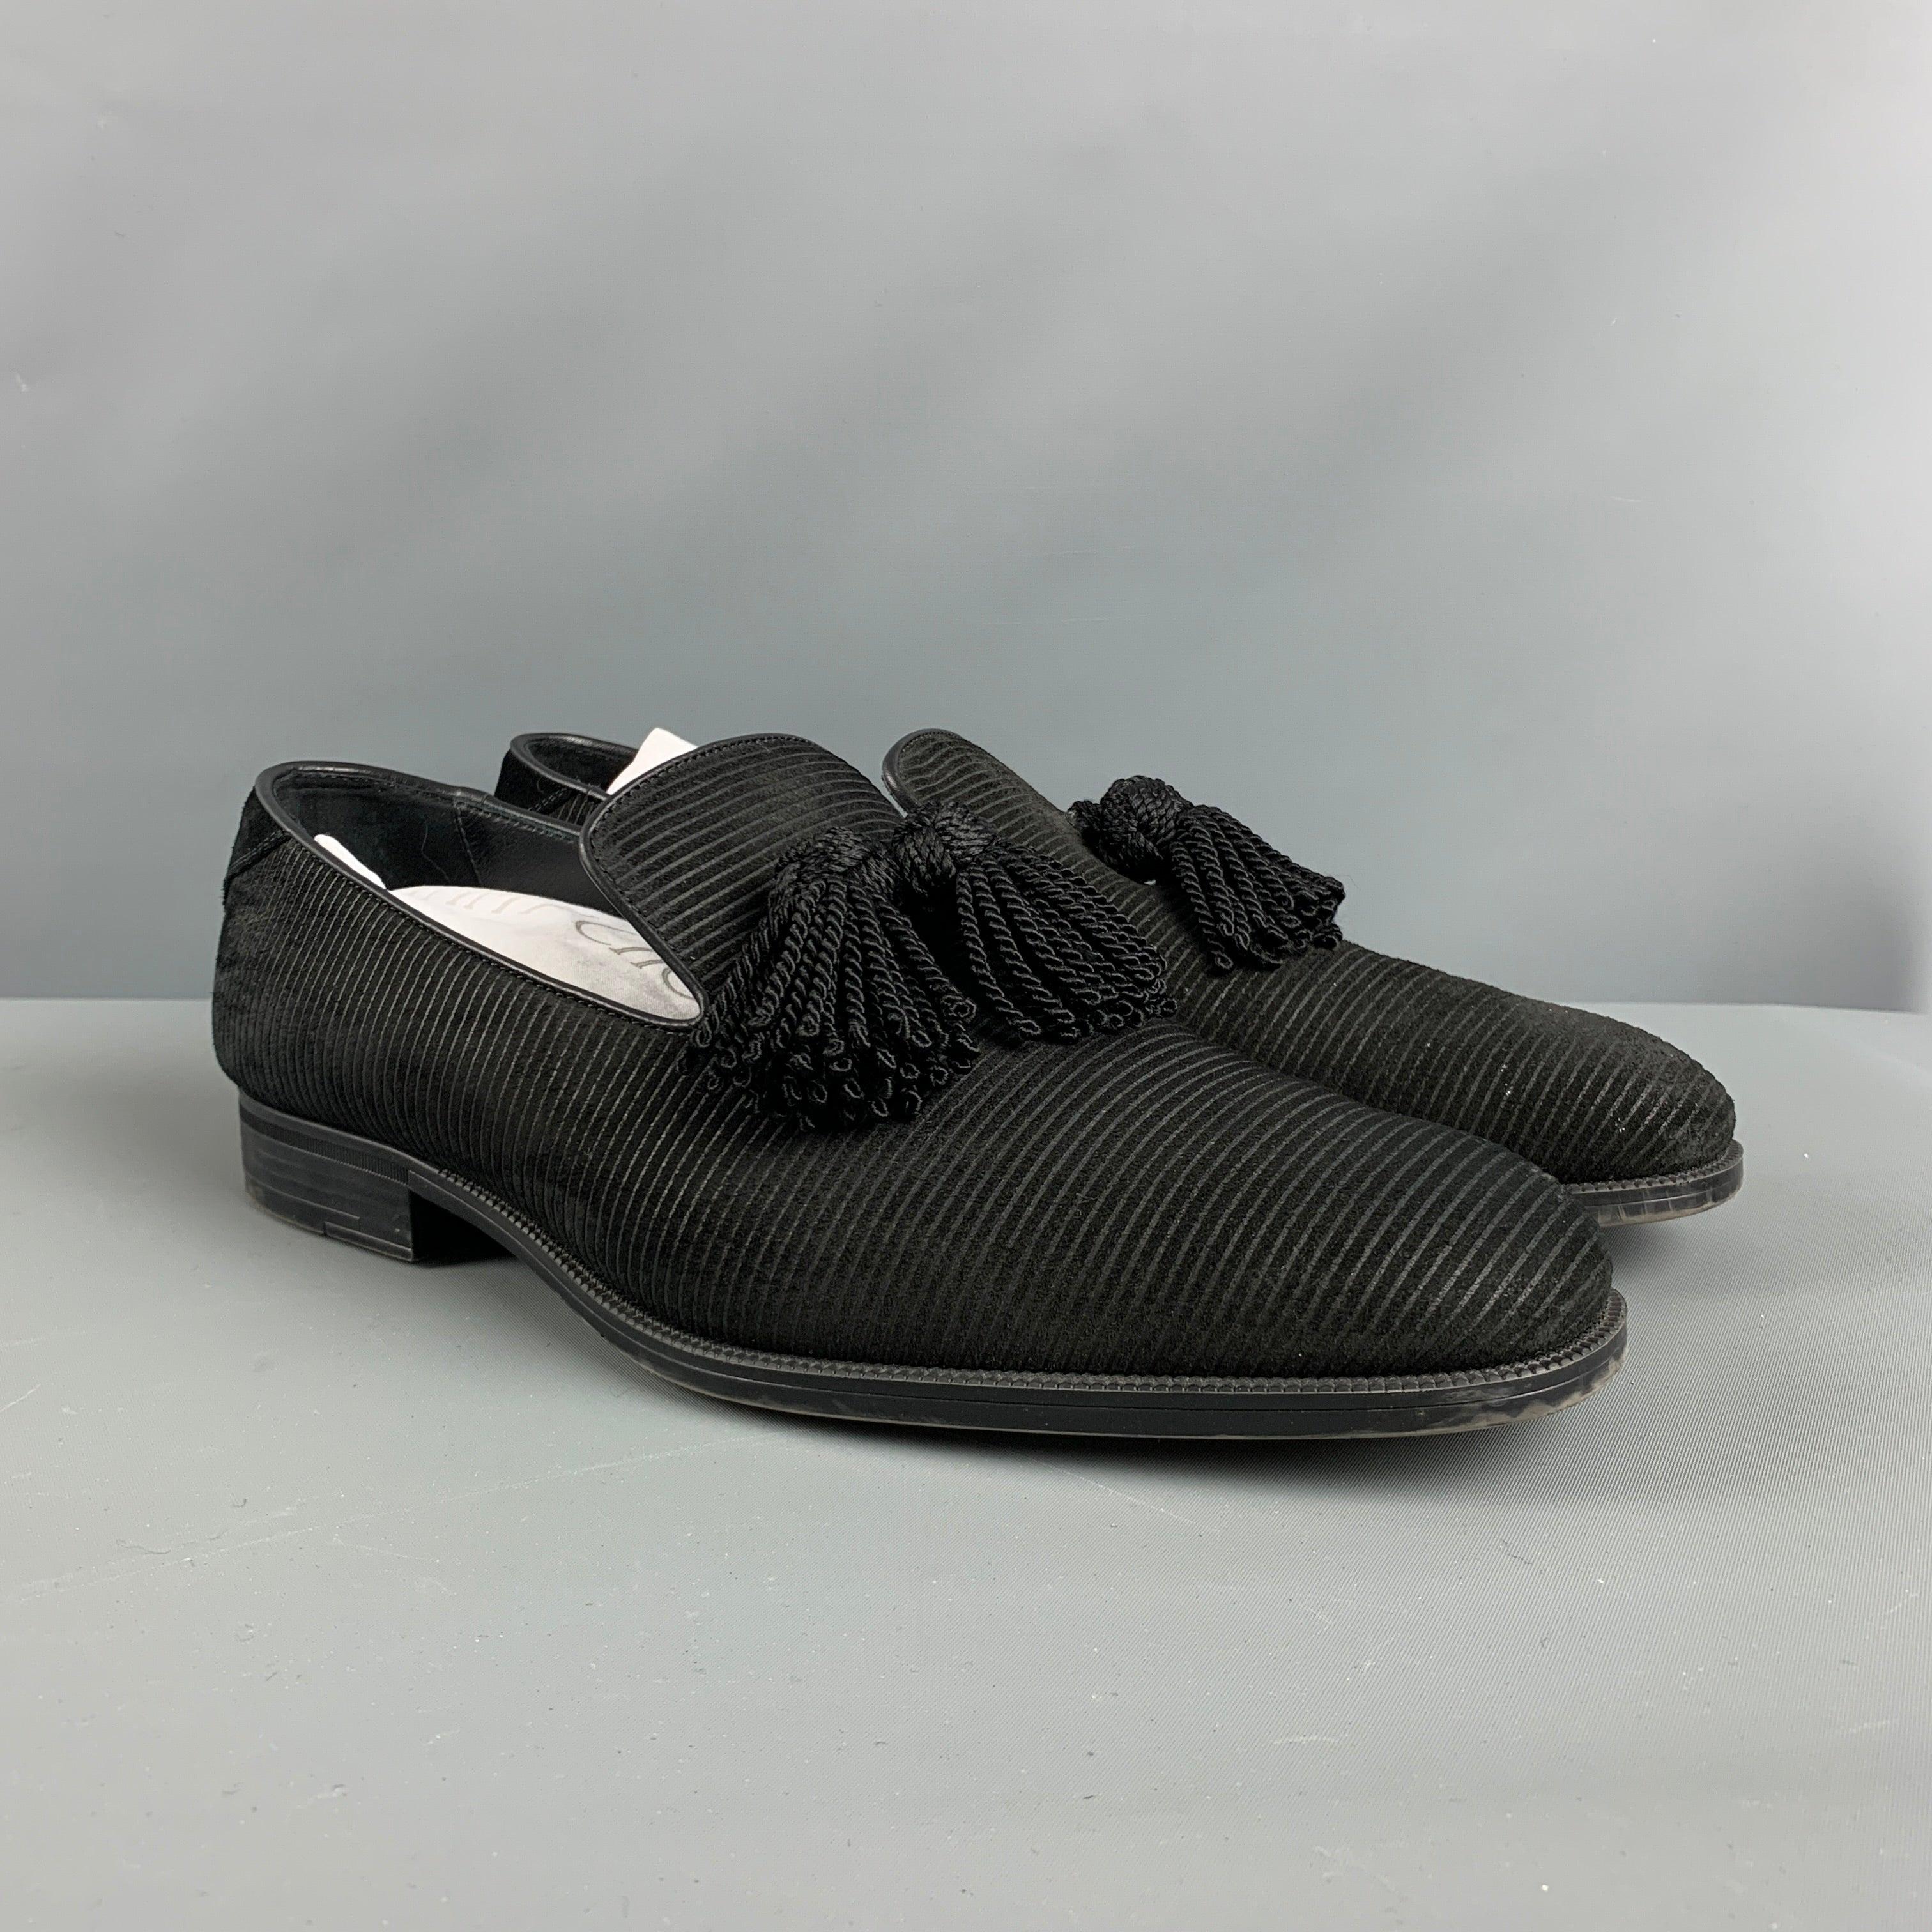 JIMMY CHOO loafers comes in a black stripped suede material featuring a slip on style and front tassel details. Comes with Dust Bag. Made in Italy. Very Good Pre-Owned Condition. 

Marked:   43 1/2Outsole: 12 inches  x 4.25 inches 
  
  
 
Reference